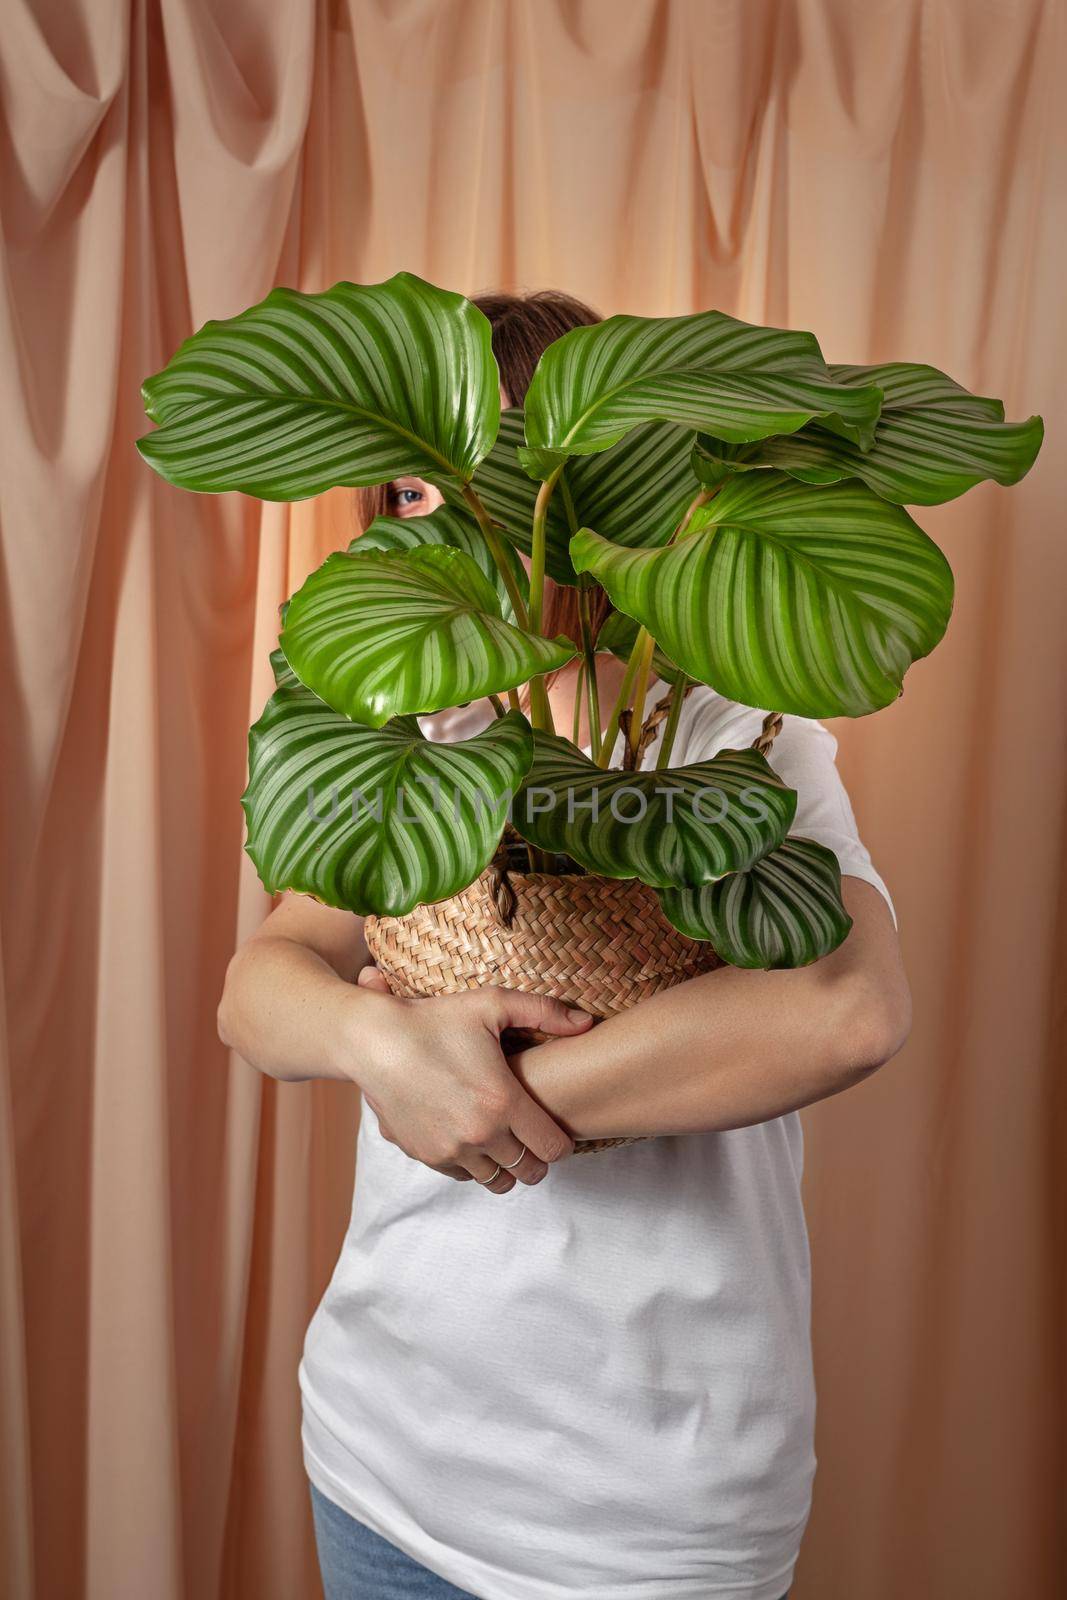 Woman looks through the leaves of the Calathea orbifolia tropical plant on a fabric curtains background.